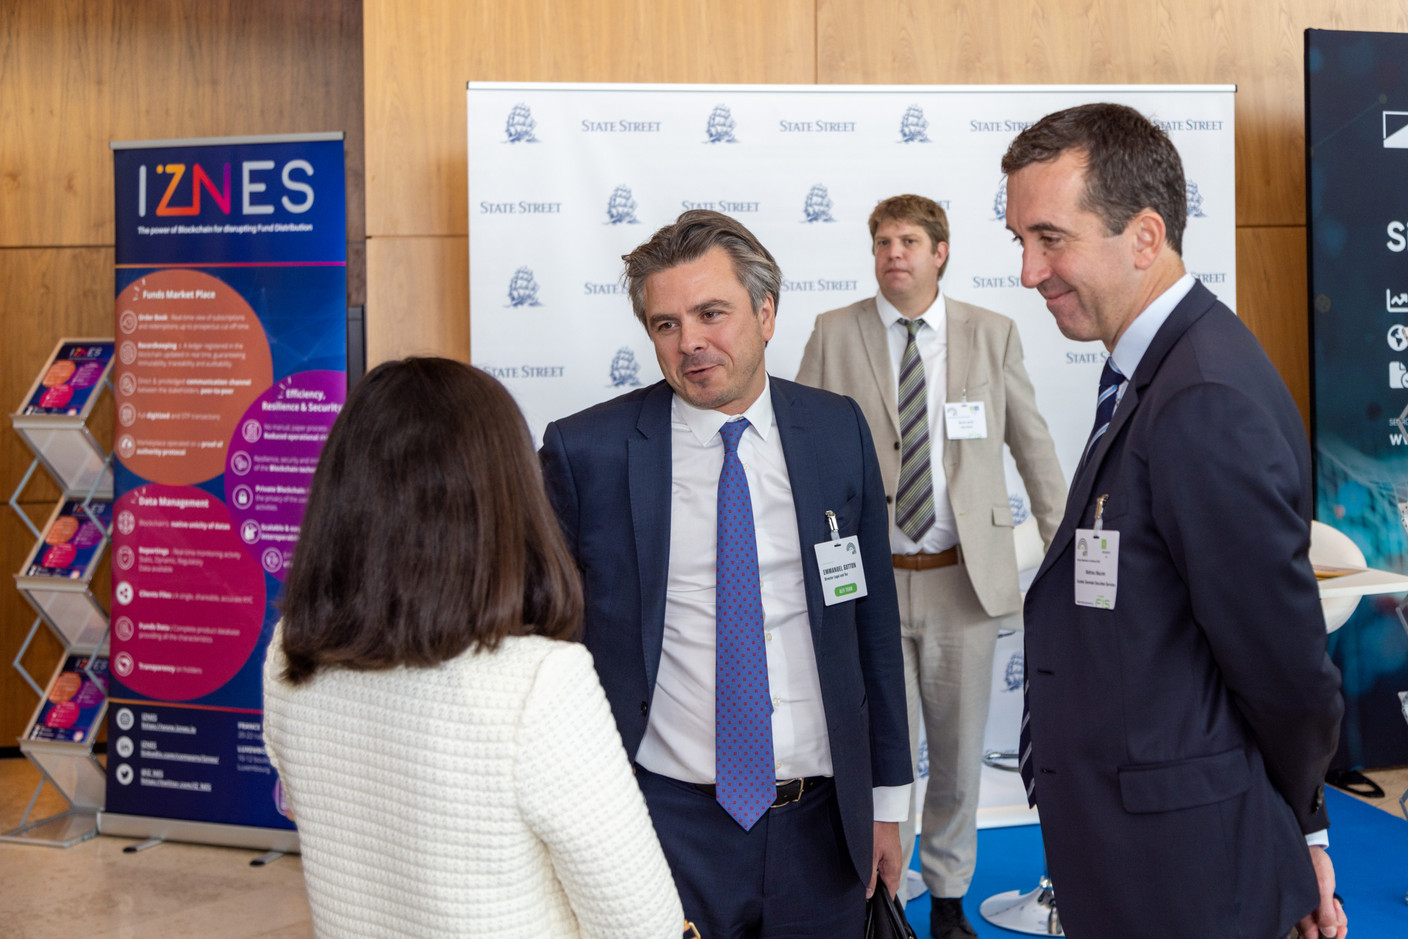 Emmanuel Gutton of the Association of the Luxembourg Fund Industry (centre); Mathieu Maurier of Société Générale (on right). Photo: Romain Gamba/Maison Moderne